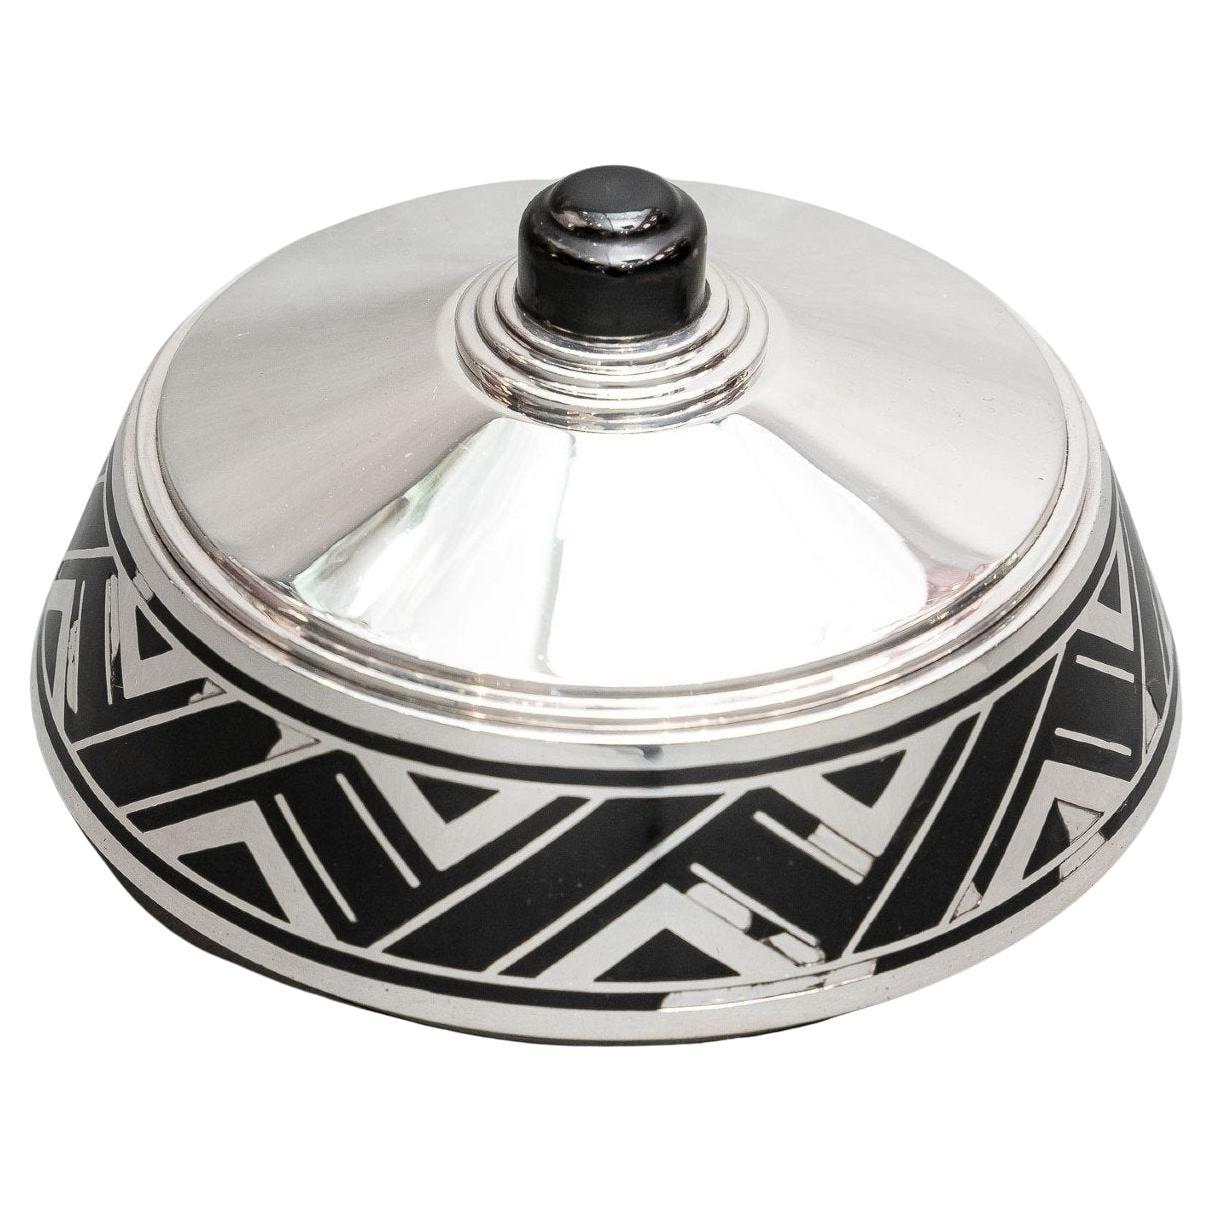 Silversmith r. Linzeler - box in solid silver and black enamel - art deco period